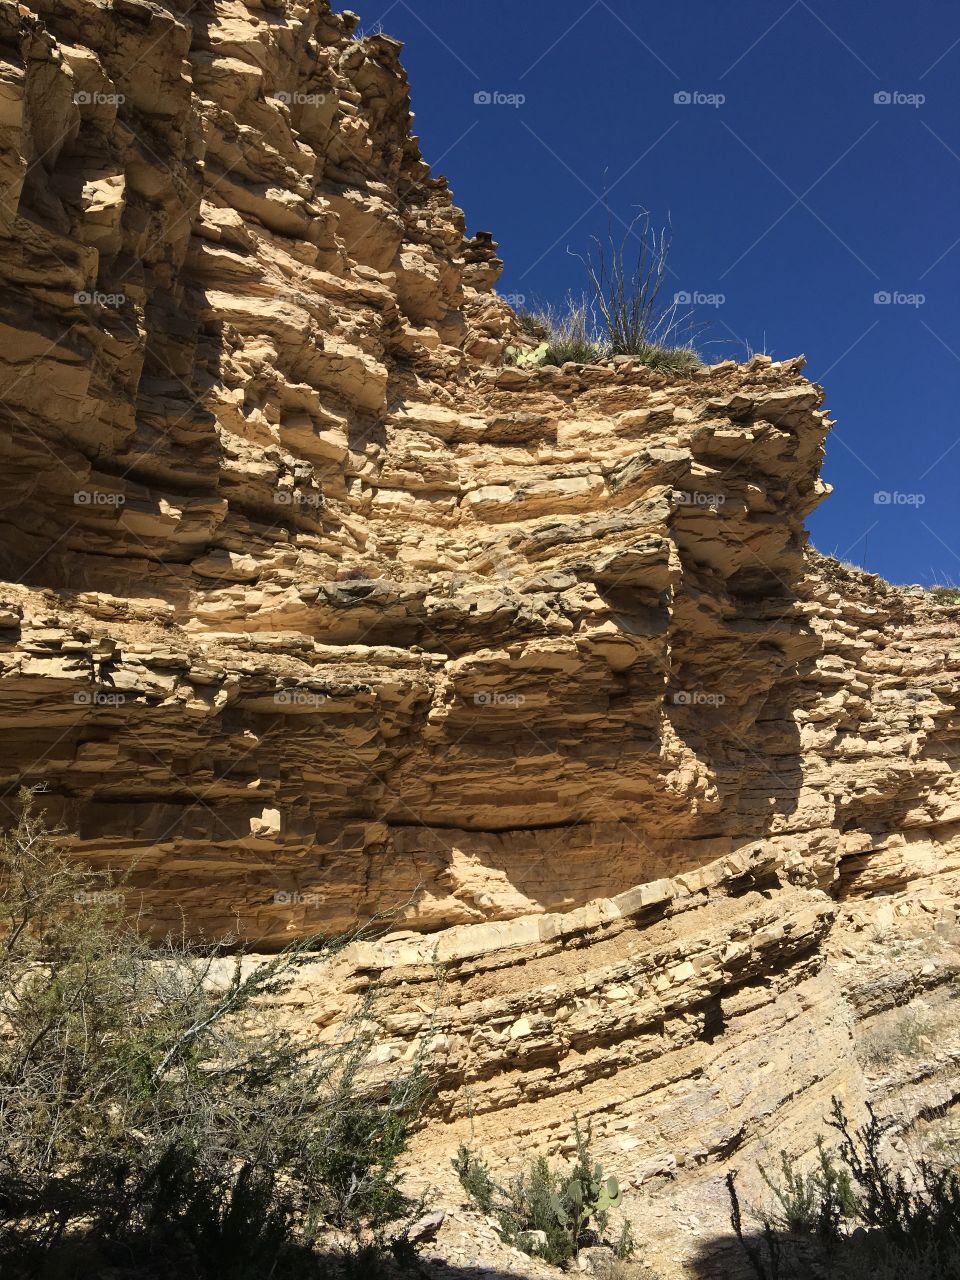 Ernst Tinaja trail leads through a limestone canyon located within Big Bend National Park. The canyon features orange, red and pink rock striations, fossils of giant oysters. The name “Ernst Tinaja” references a 13-foot, natural rock pool, also known as a “kettle.” The Ernst Tinaja trail lies  about 8 miles north of the park’s Rio Grande Village visitor center along the Old Ore Road.  